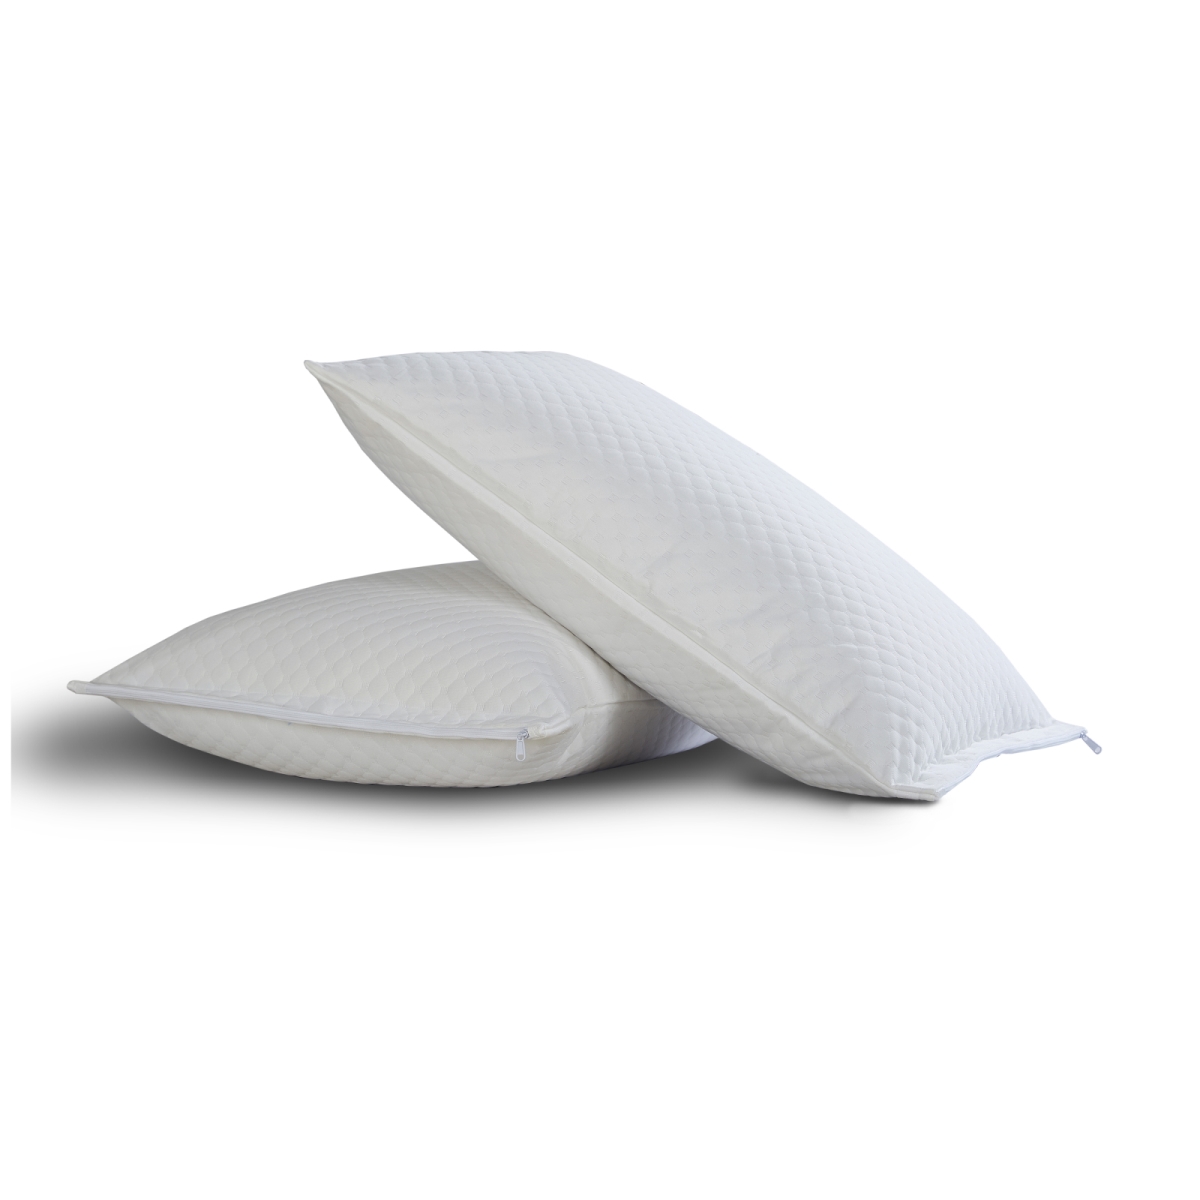 All17102whit10 Comfort Top Pillow Protectors With Bed Bug Blocker, White - Pack Of 2